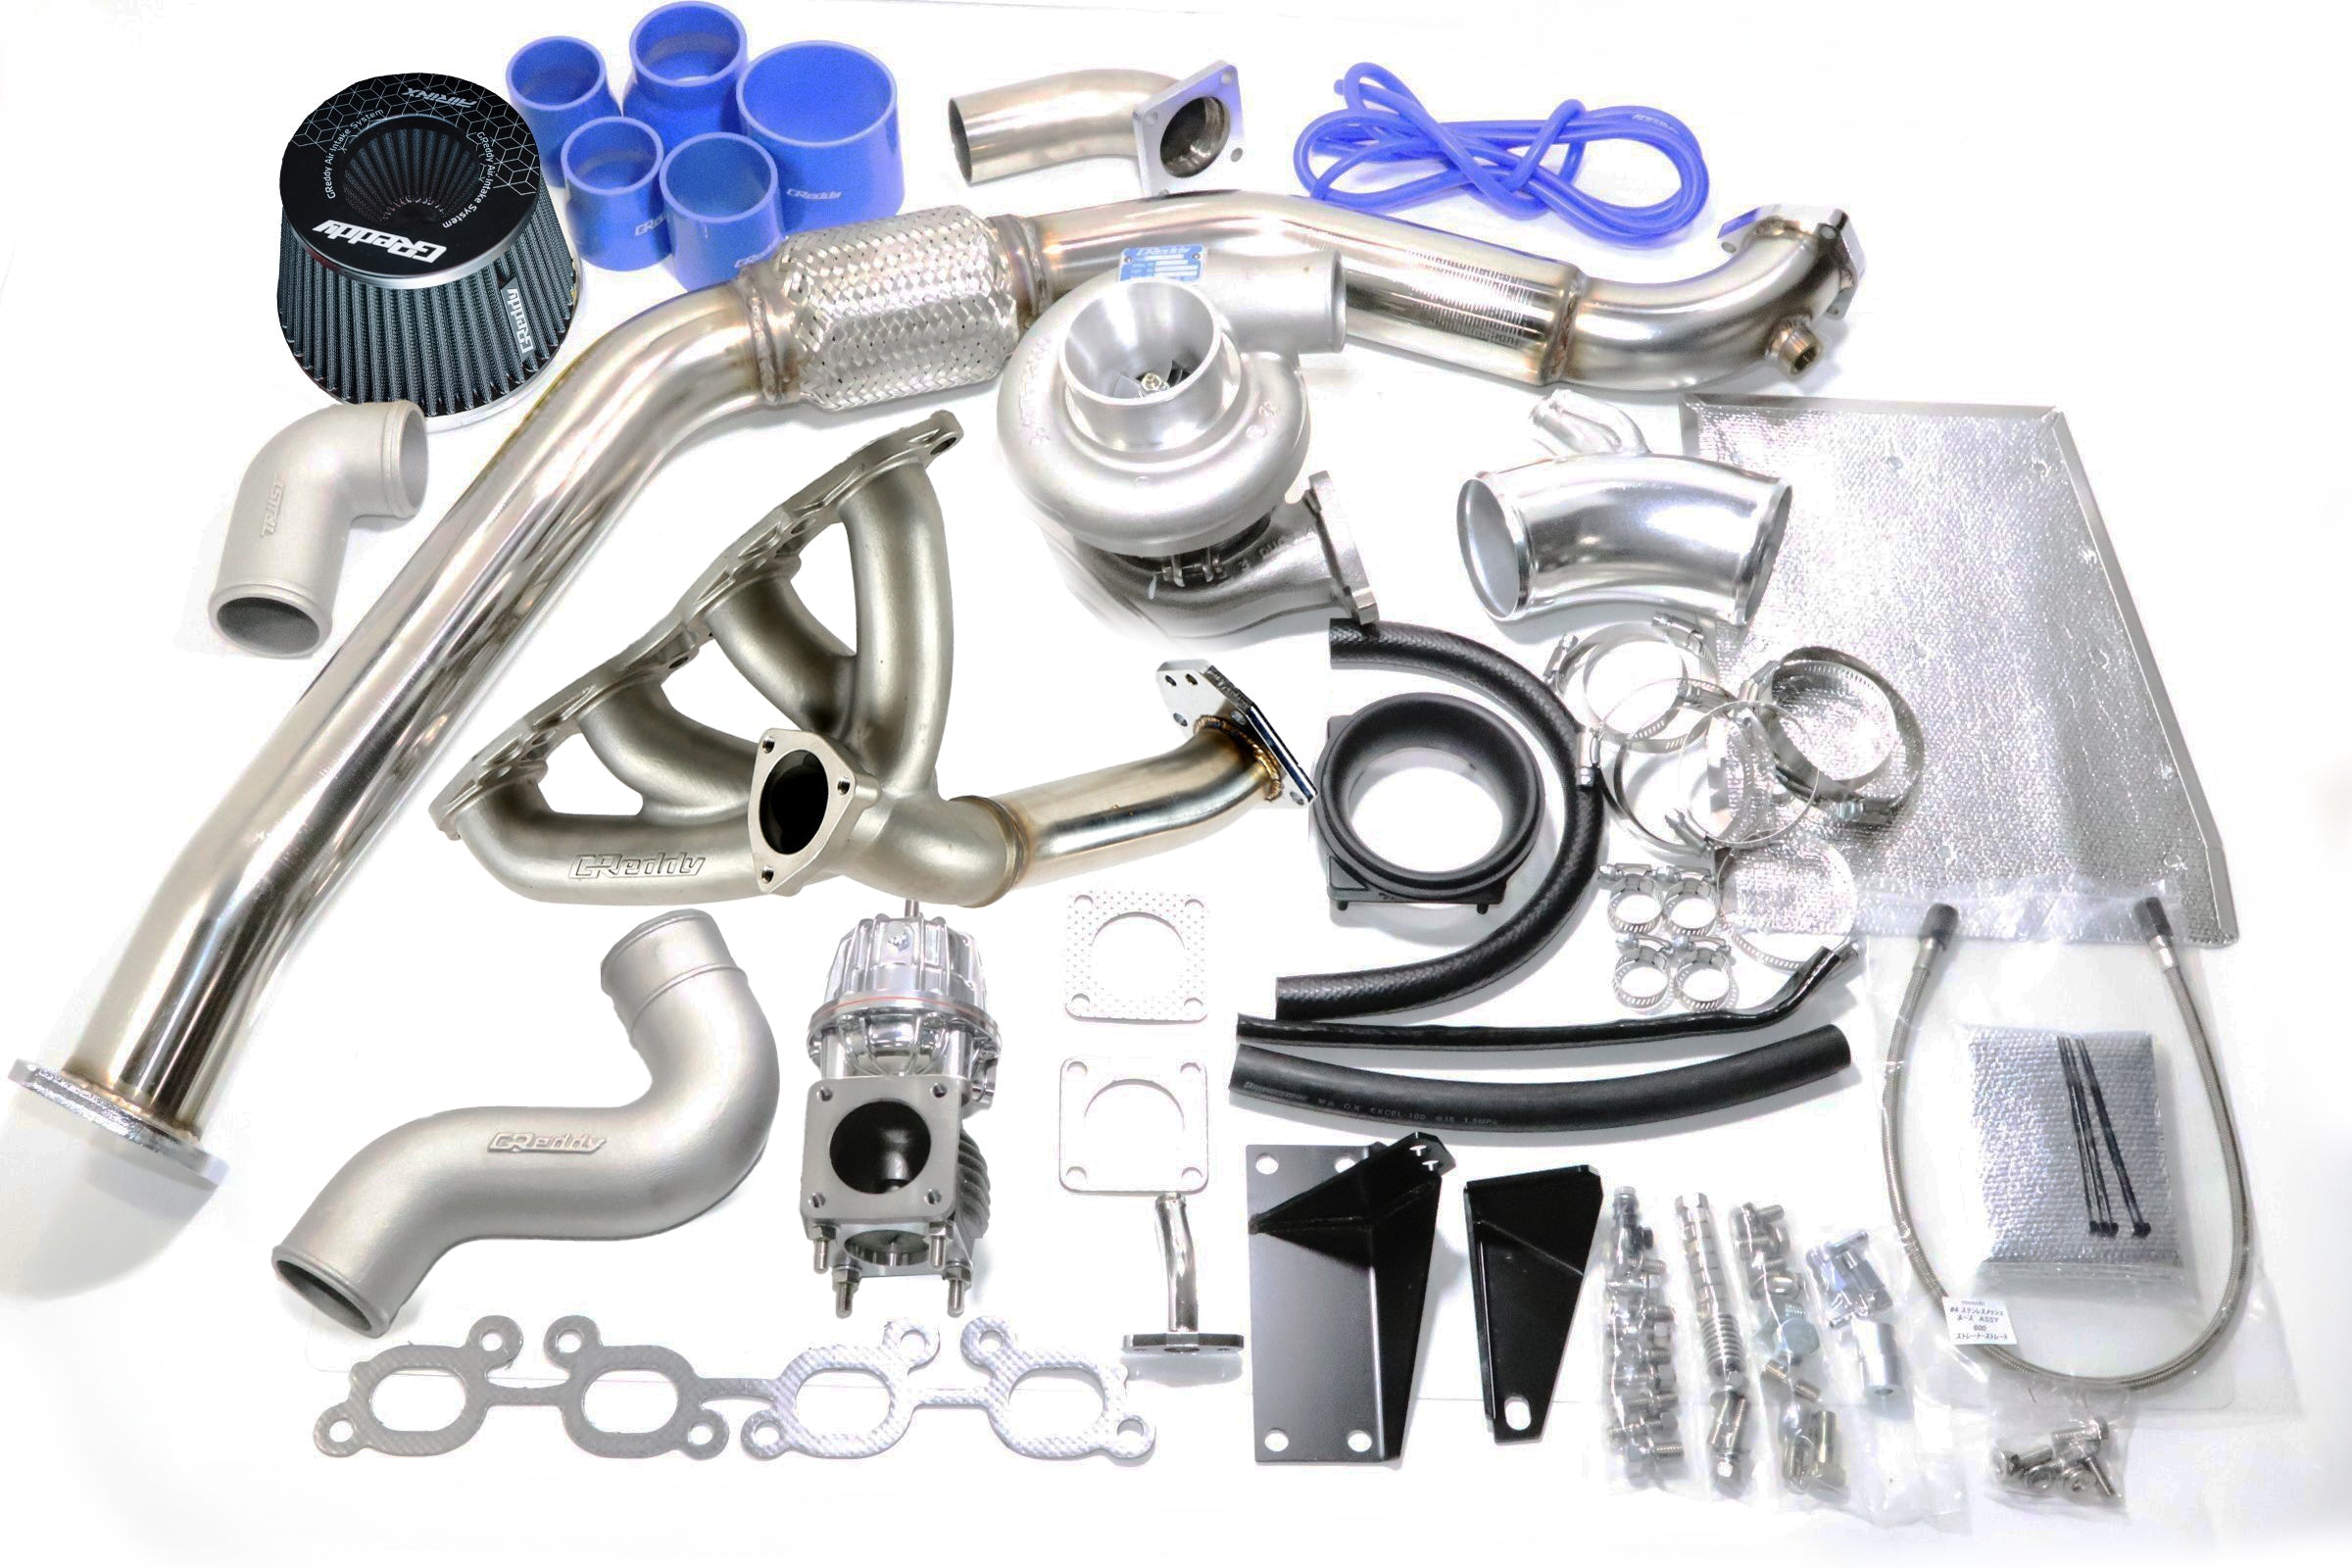 TURBO UPGRADE KIT (R)PS13 AFTER M/C TD06 EXT W/G - (11520140 11520141 11520142 11520143 11520144)